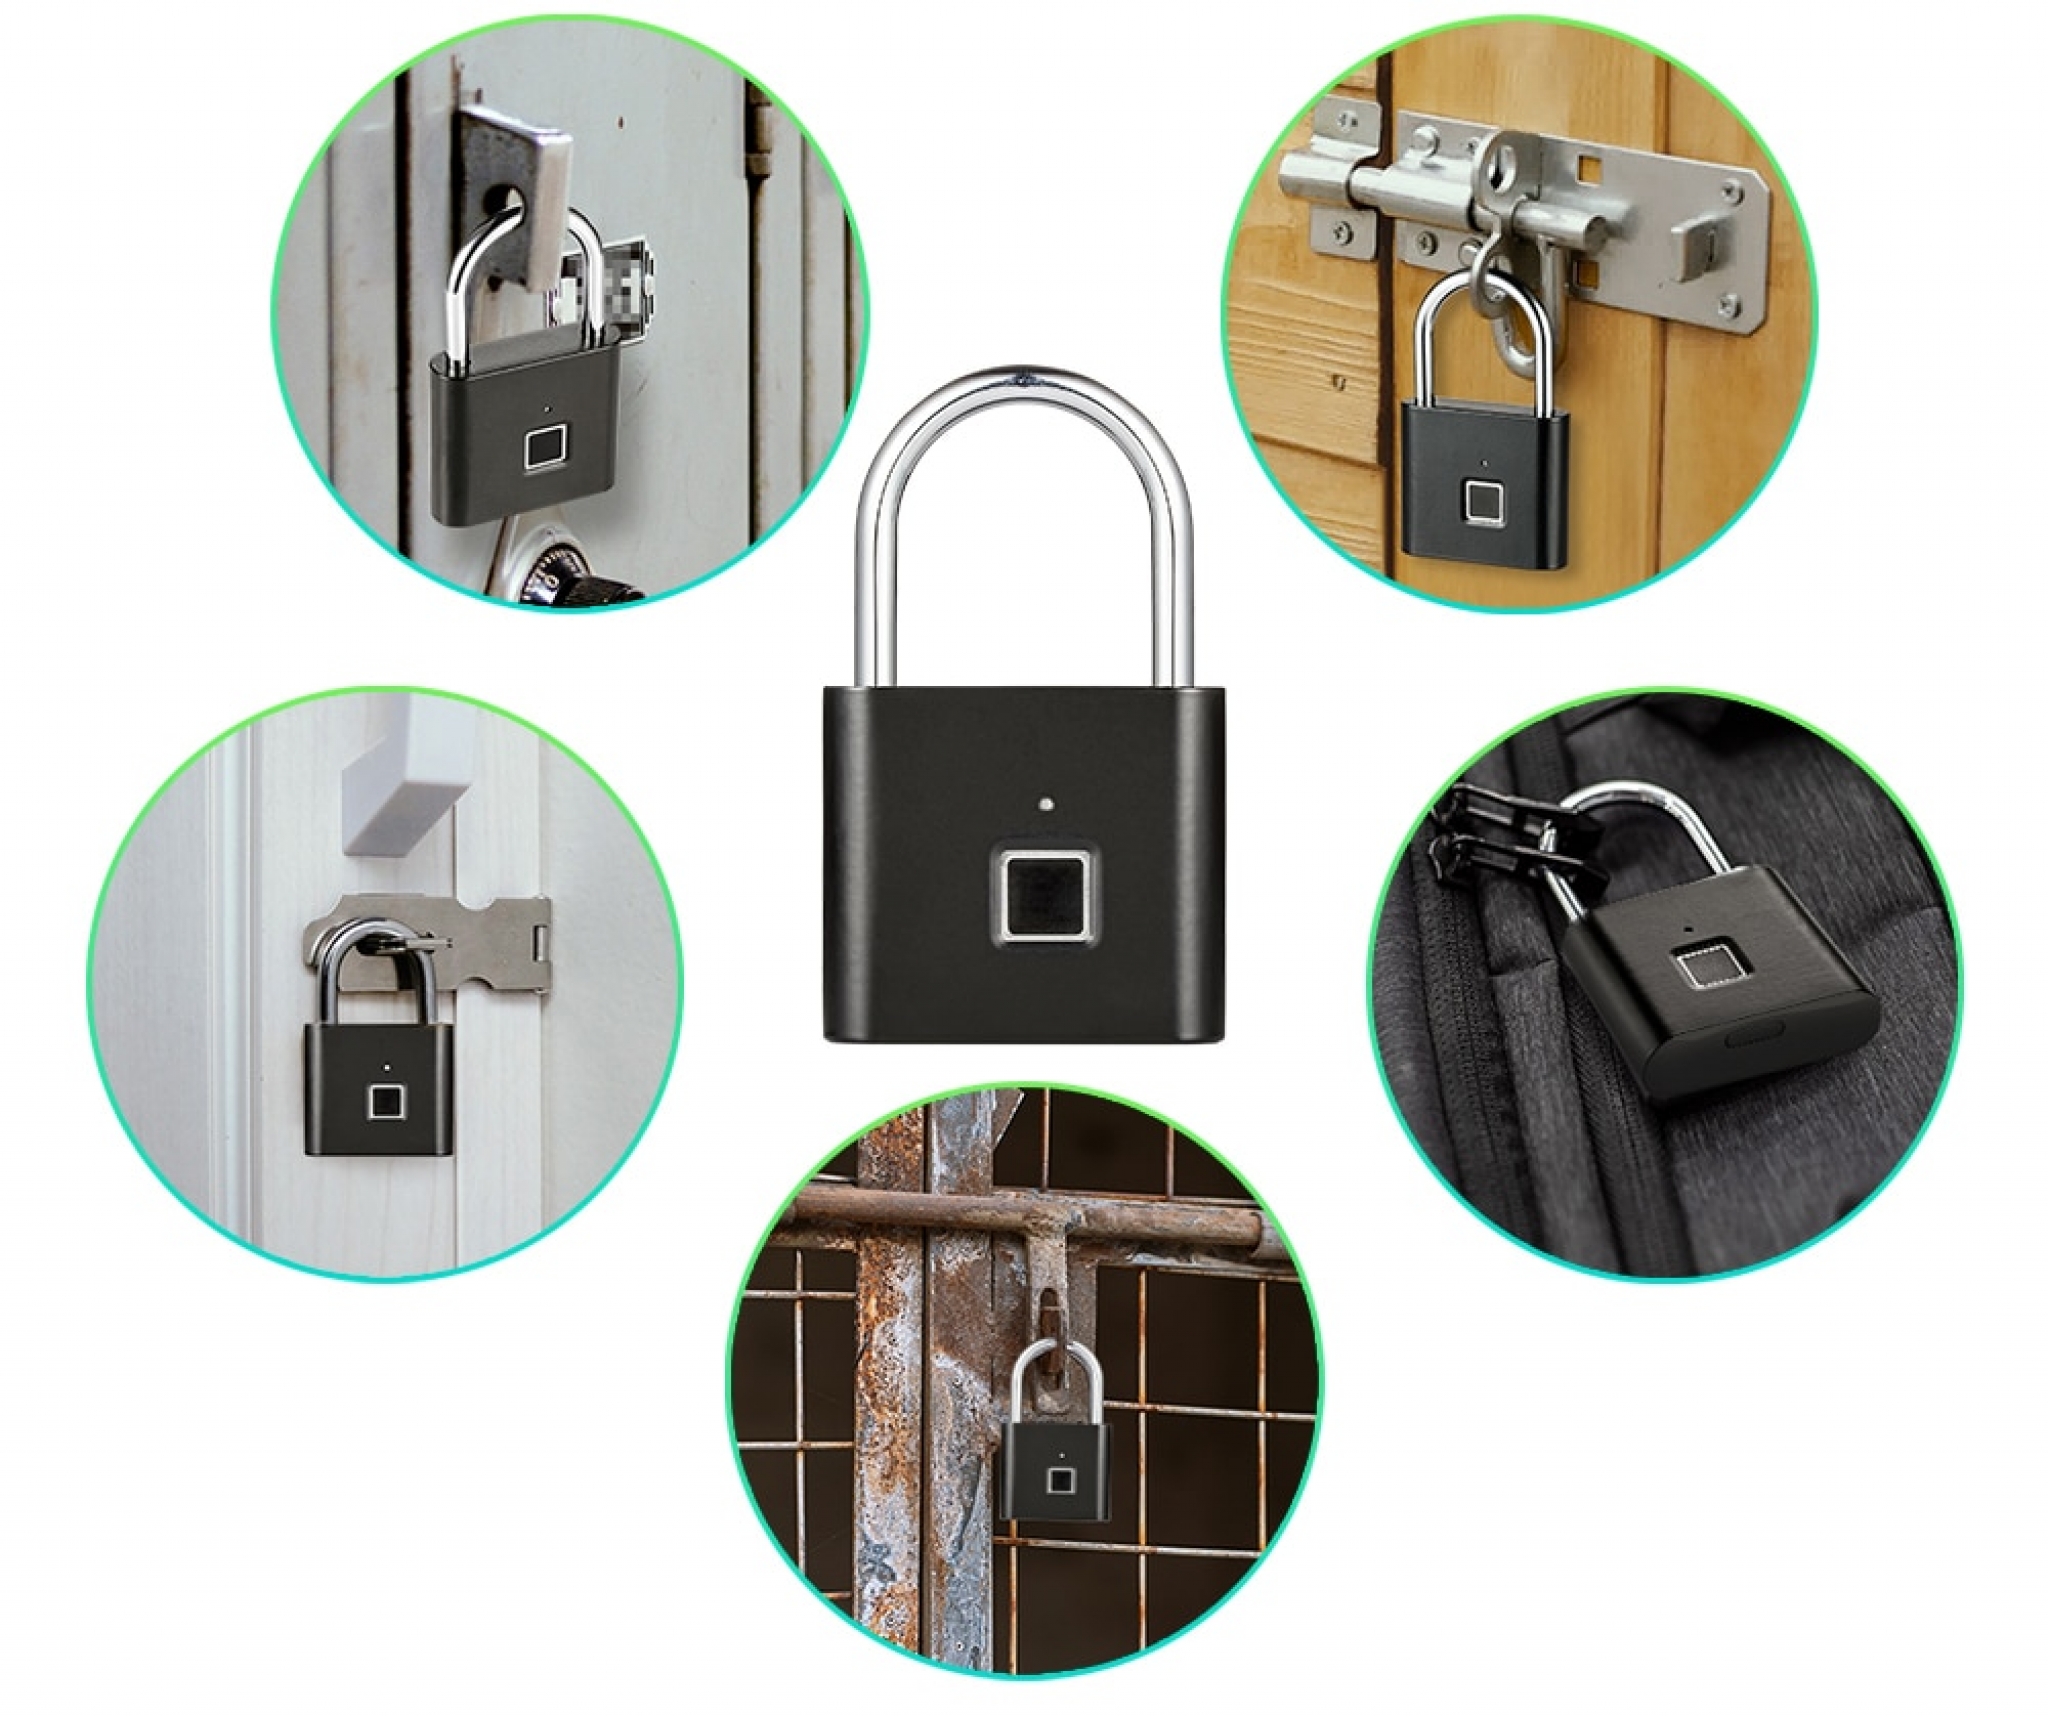 Buy Home Security Products and enjoy seamless shopping by Vitcore